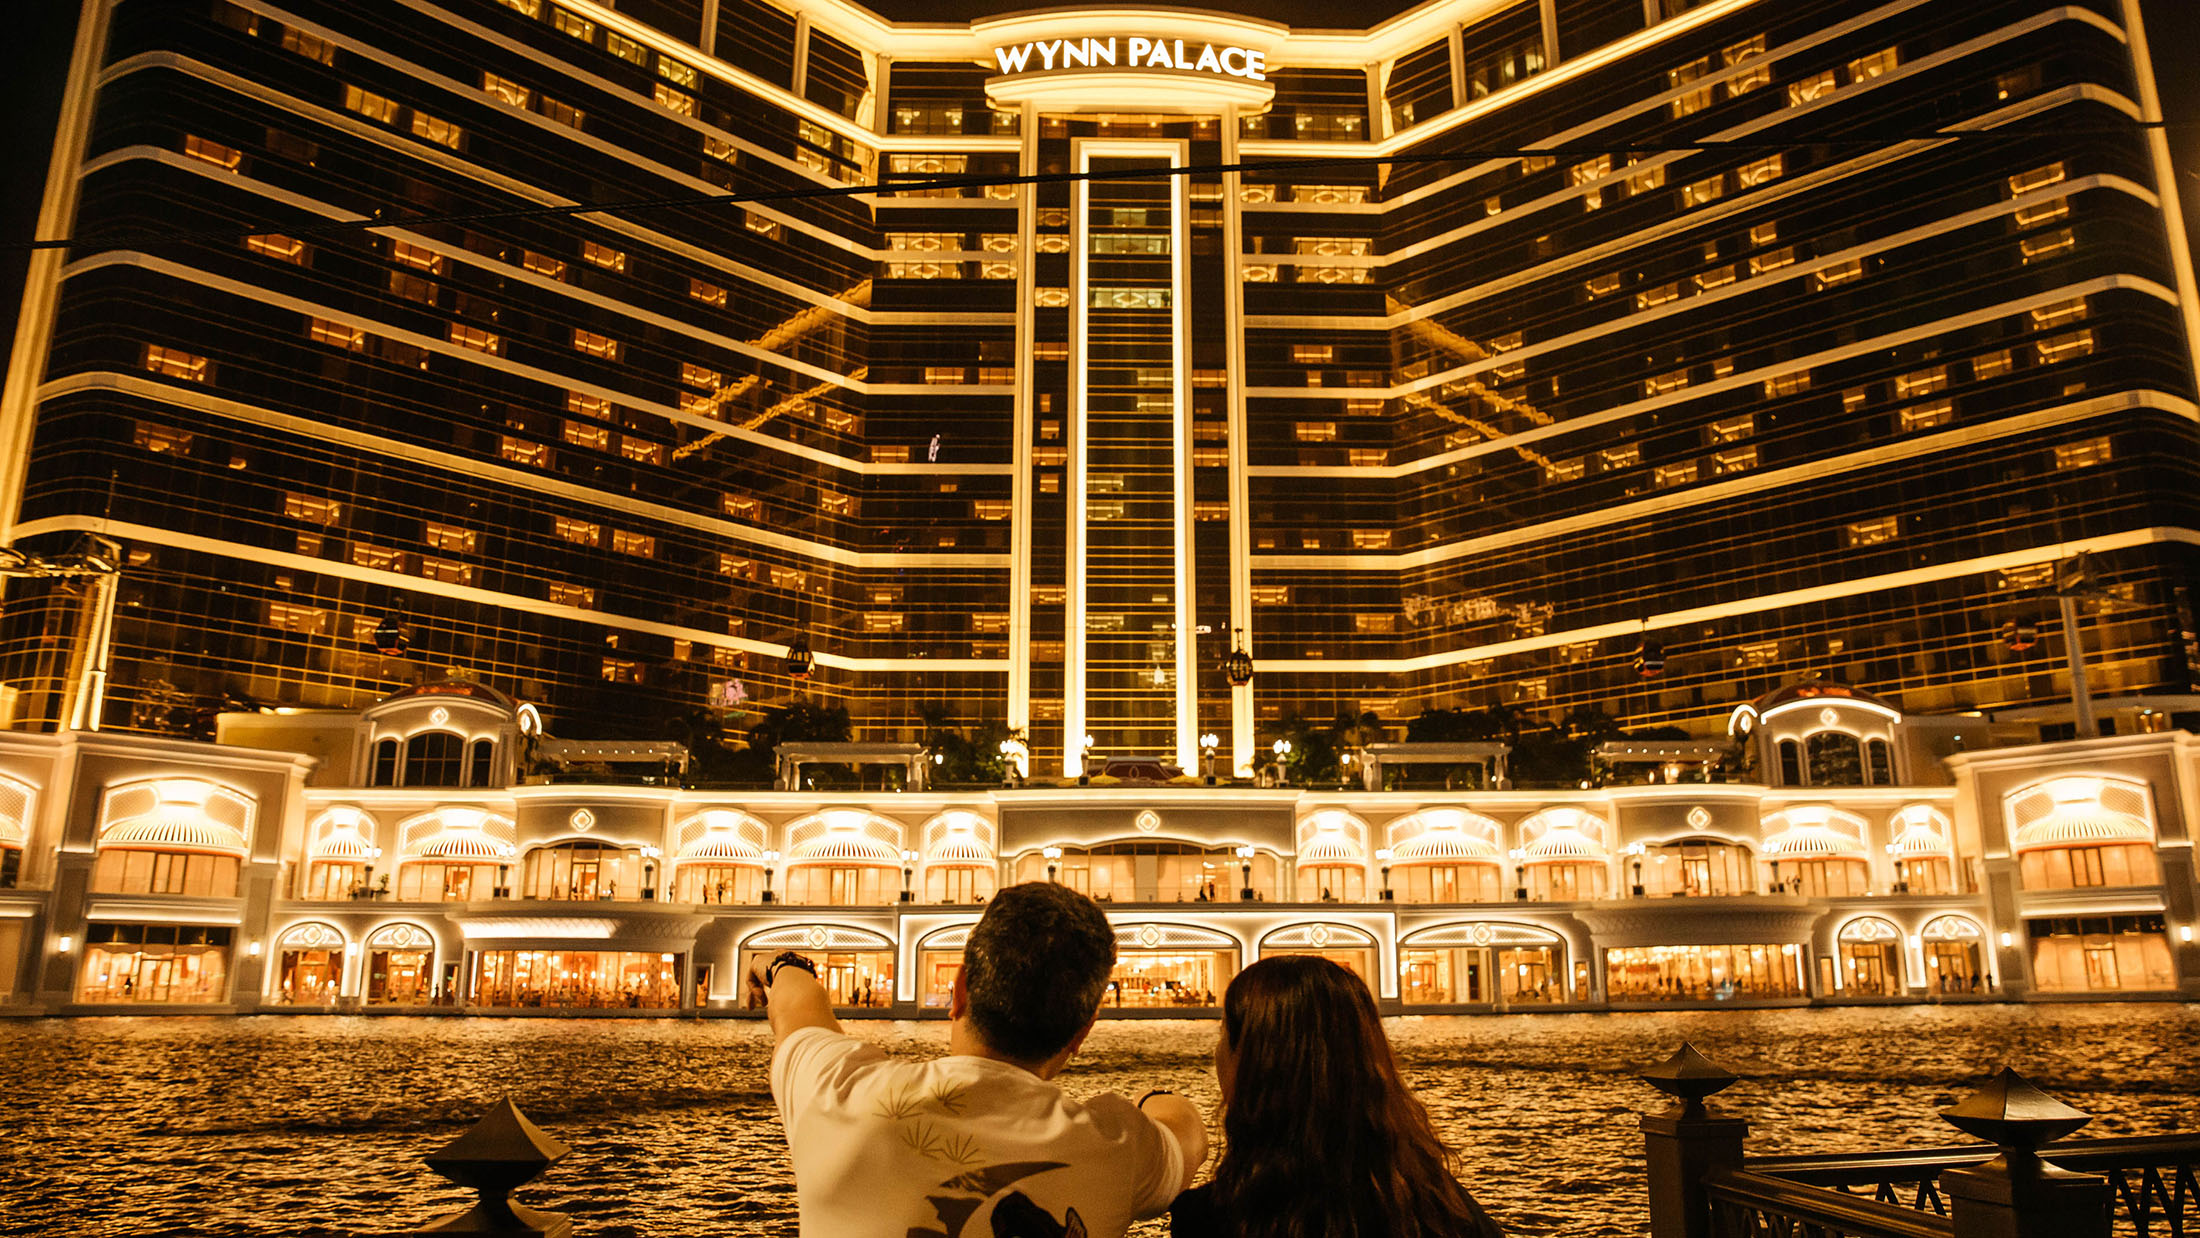 People stand in front of Wynn Resorts Ltd.'s Wynn Palace casino resort at night in Macau, China, on Sunday, Aug. 28, 2016. Macau is scheduled to release gross domestic product (GDP) figures on Aug. 30.
